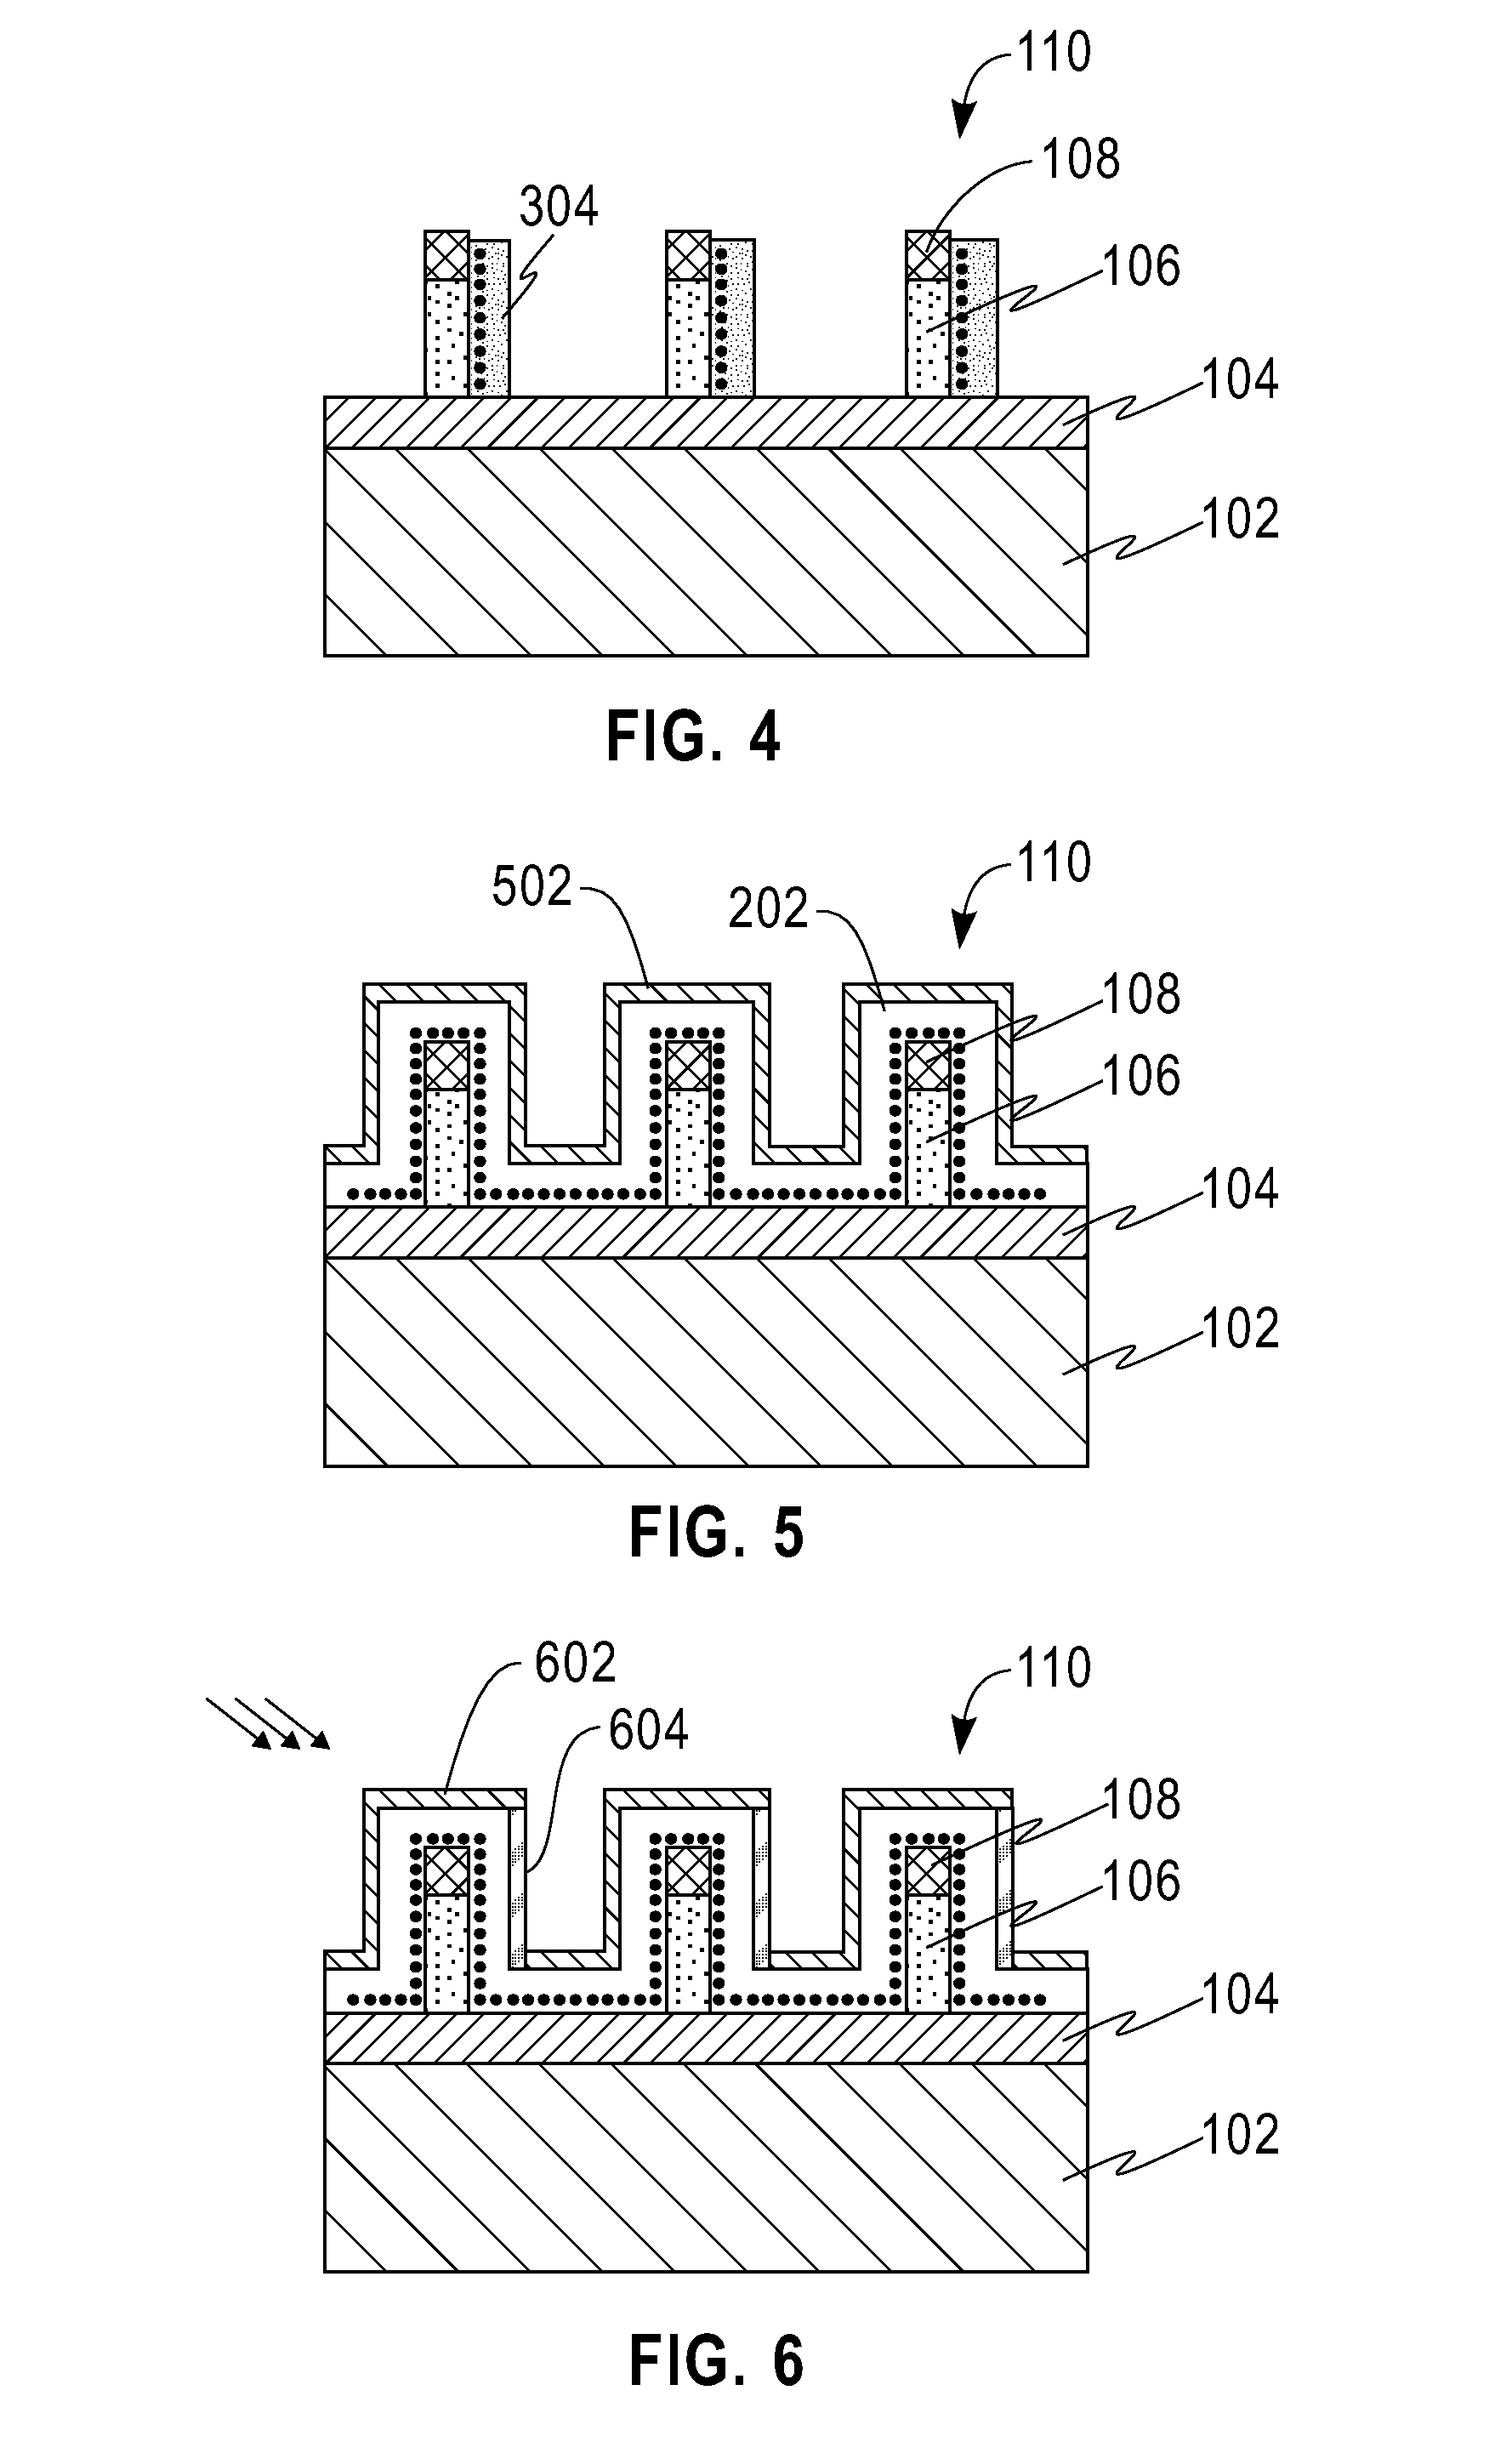 FinFET NON-VOLATILE MEMORY AND METHOD OF FABRICATION